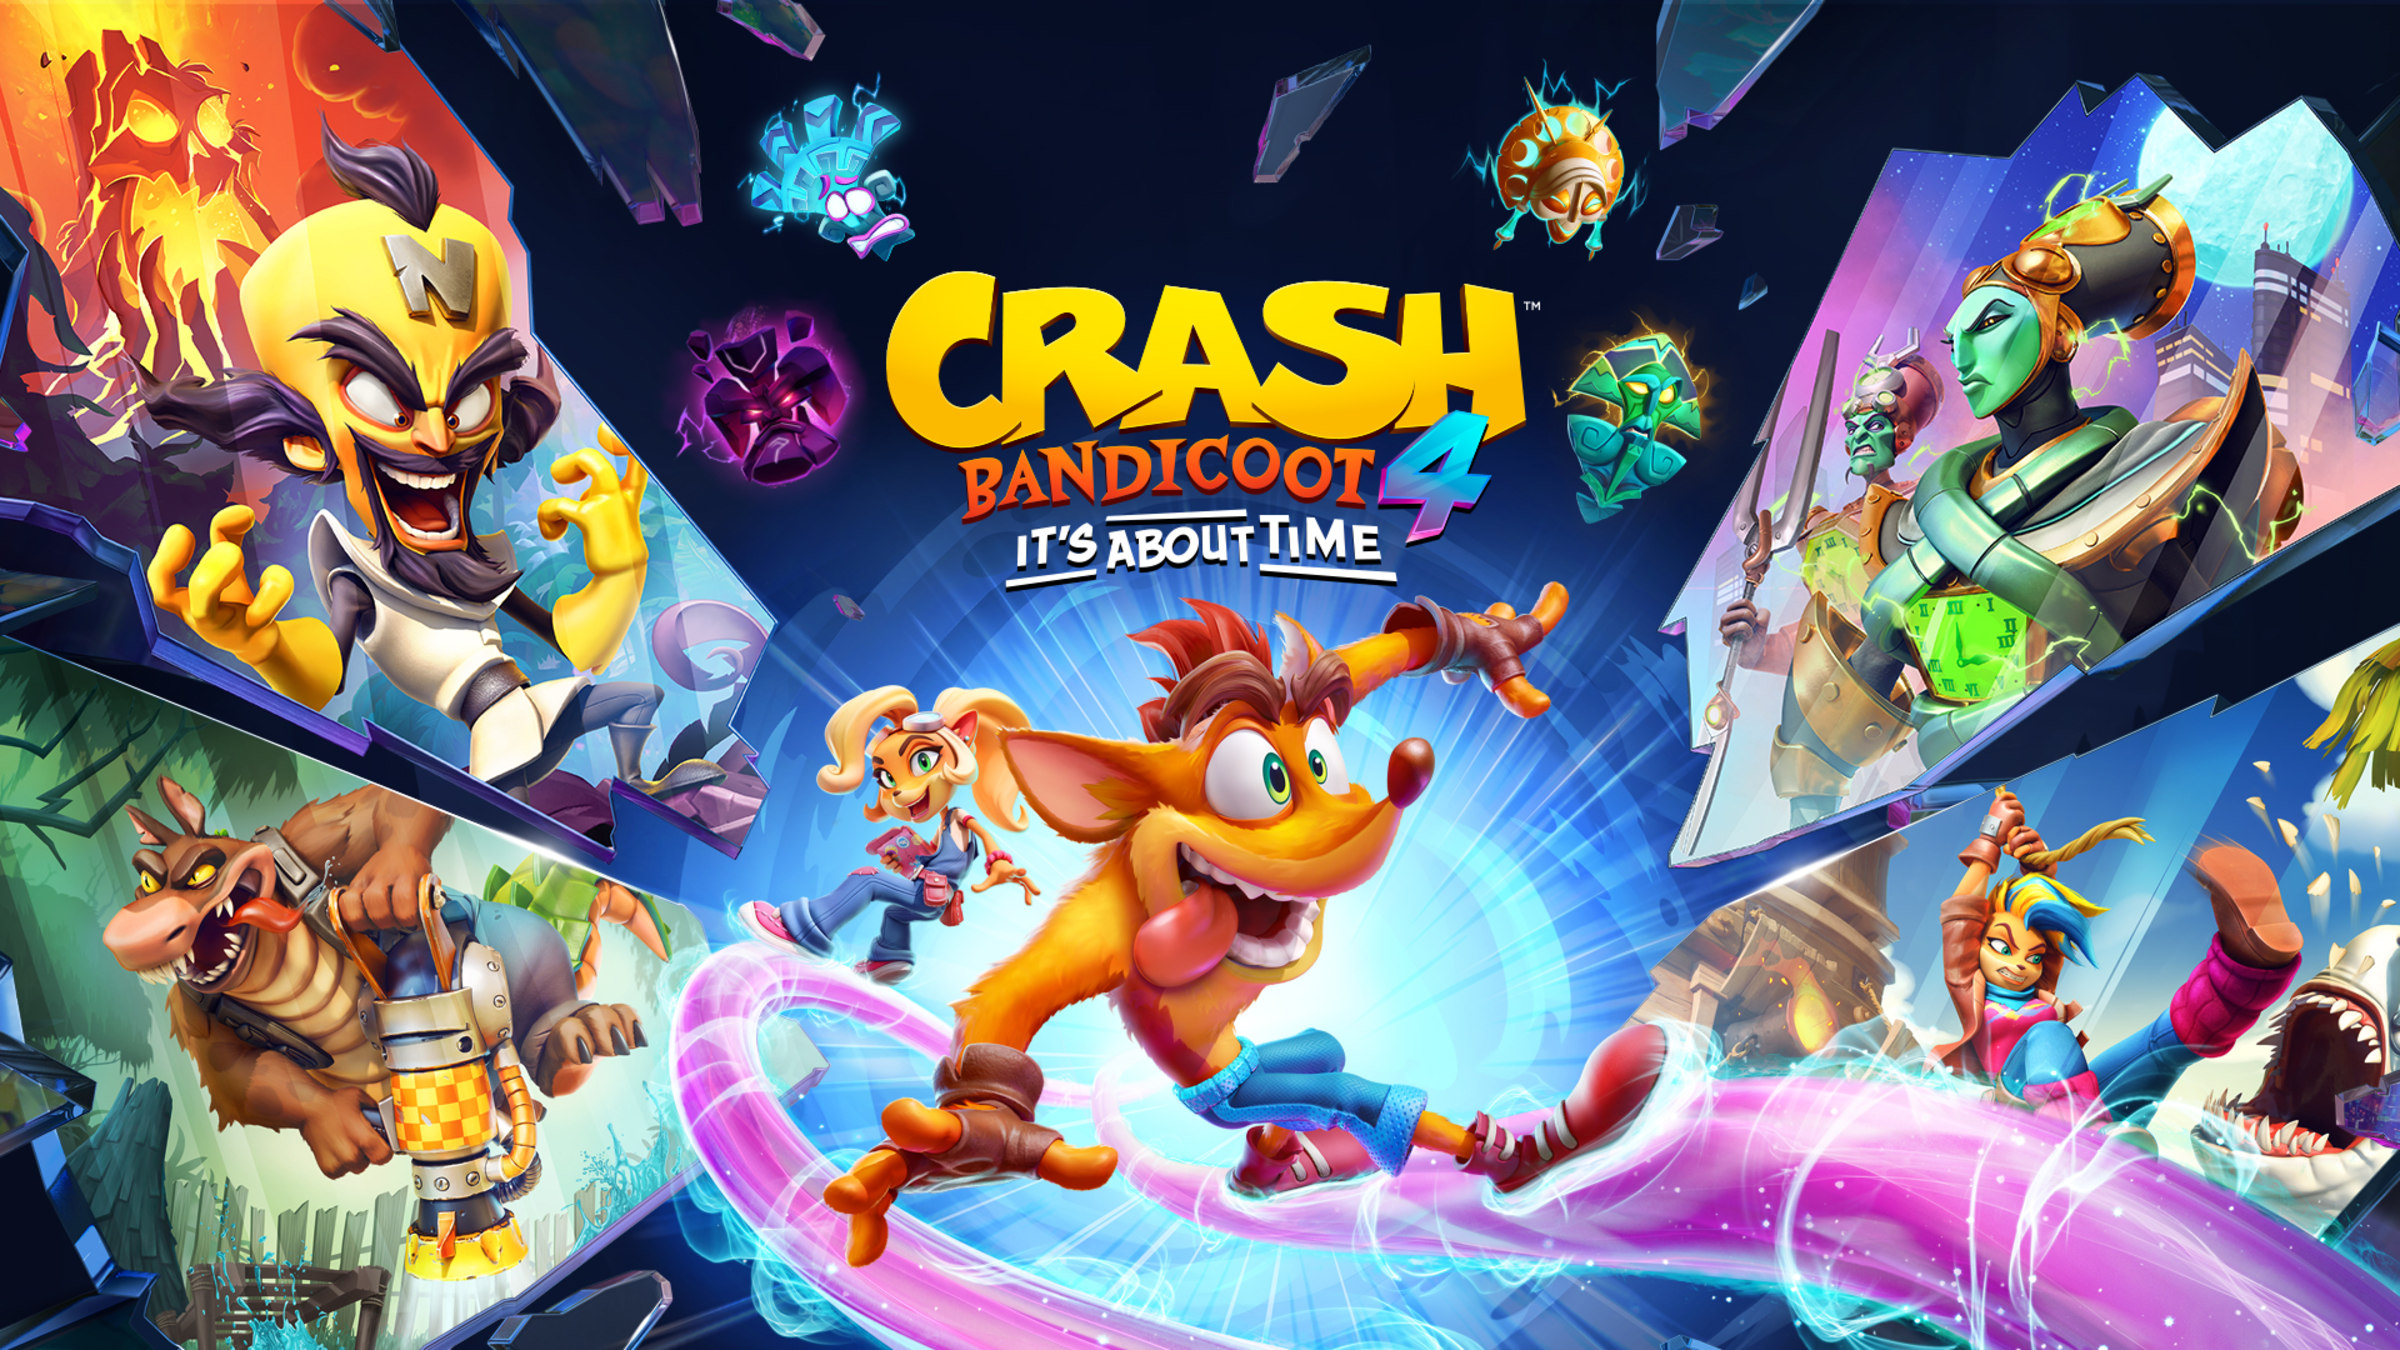 Crash Bandicoot™ 4: It's About Time for Nintendo Switch - Official